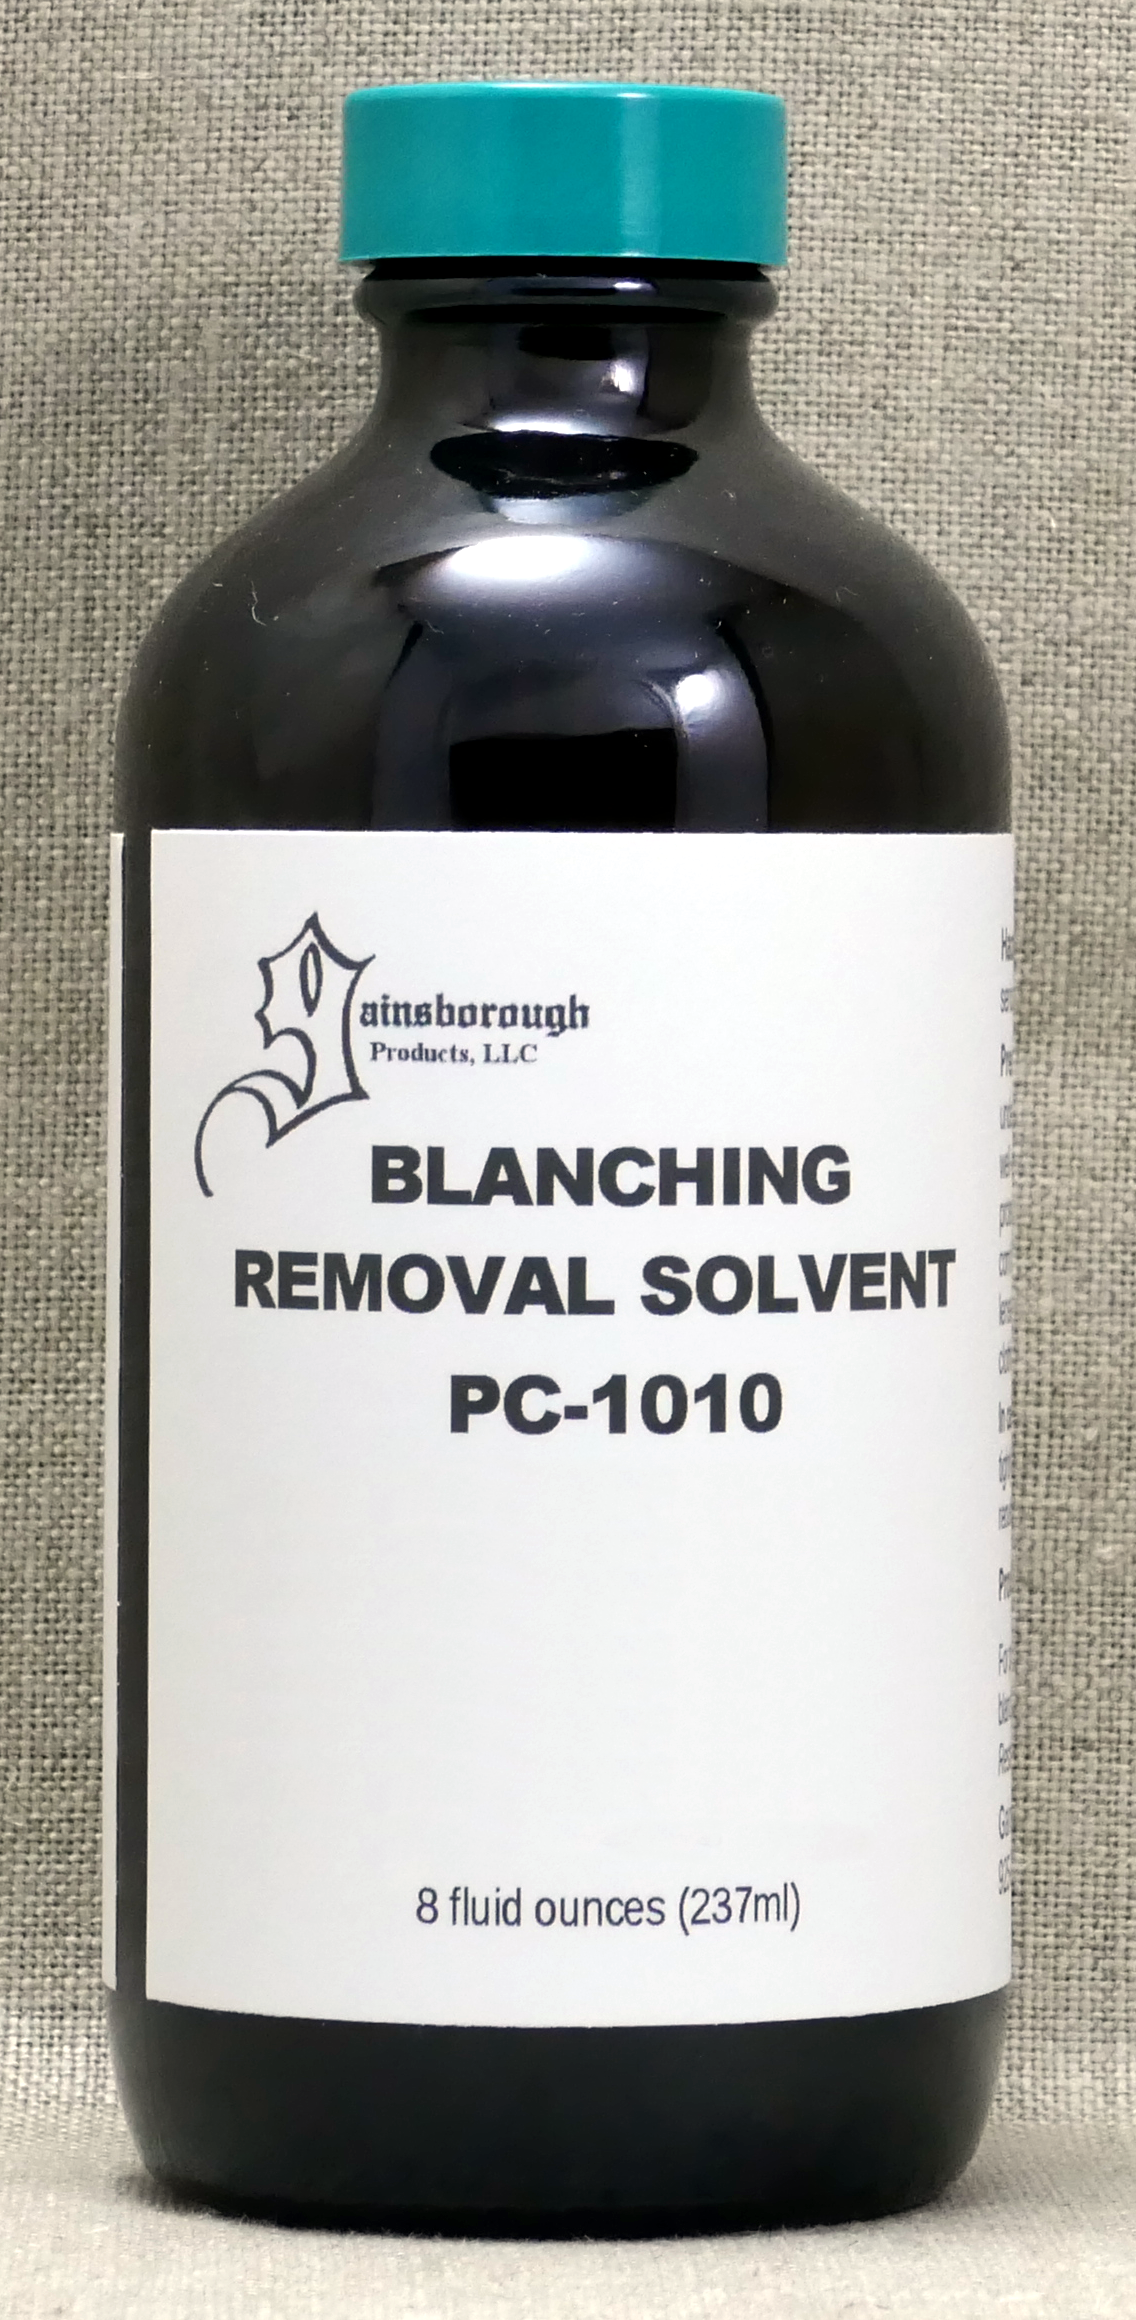 PC-1010 Blanching Removal Solvent